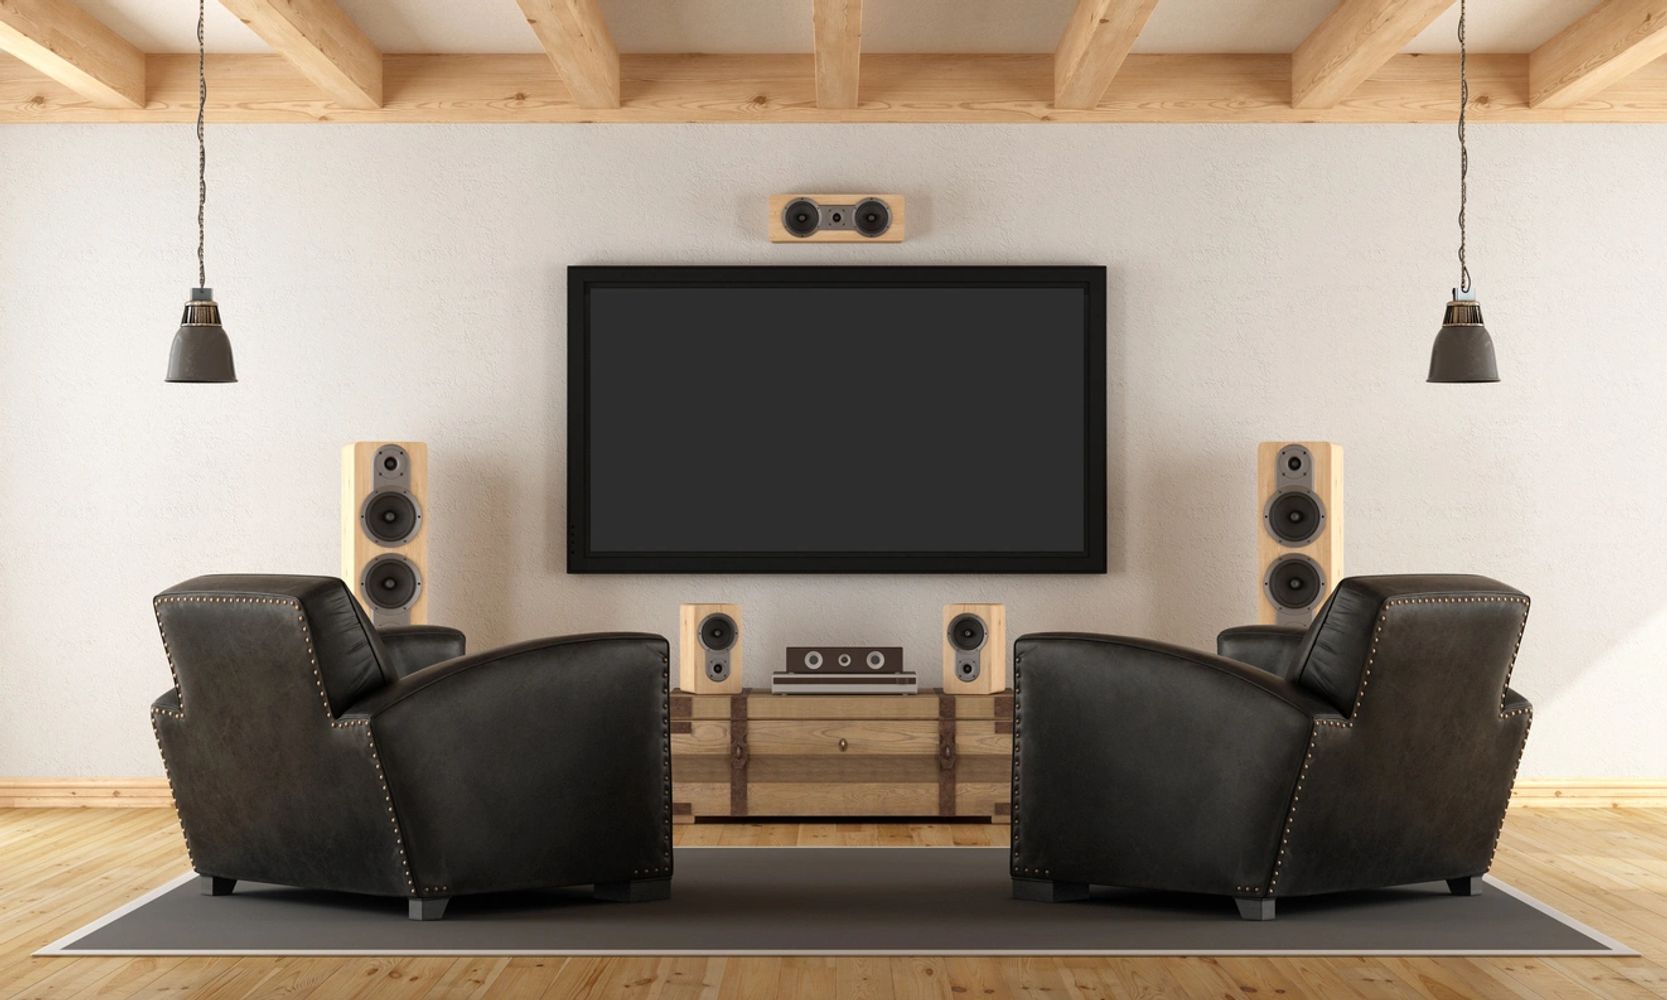 TV Mounting, home theater design, speaker installation, wire concealment, smart homes. All in One